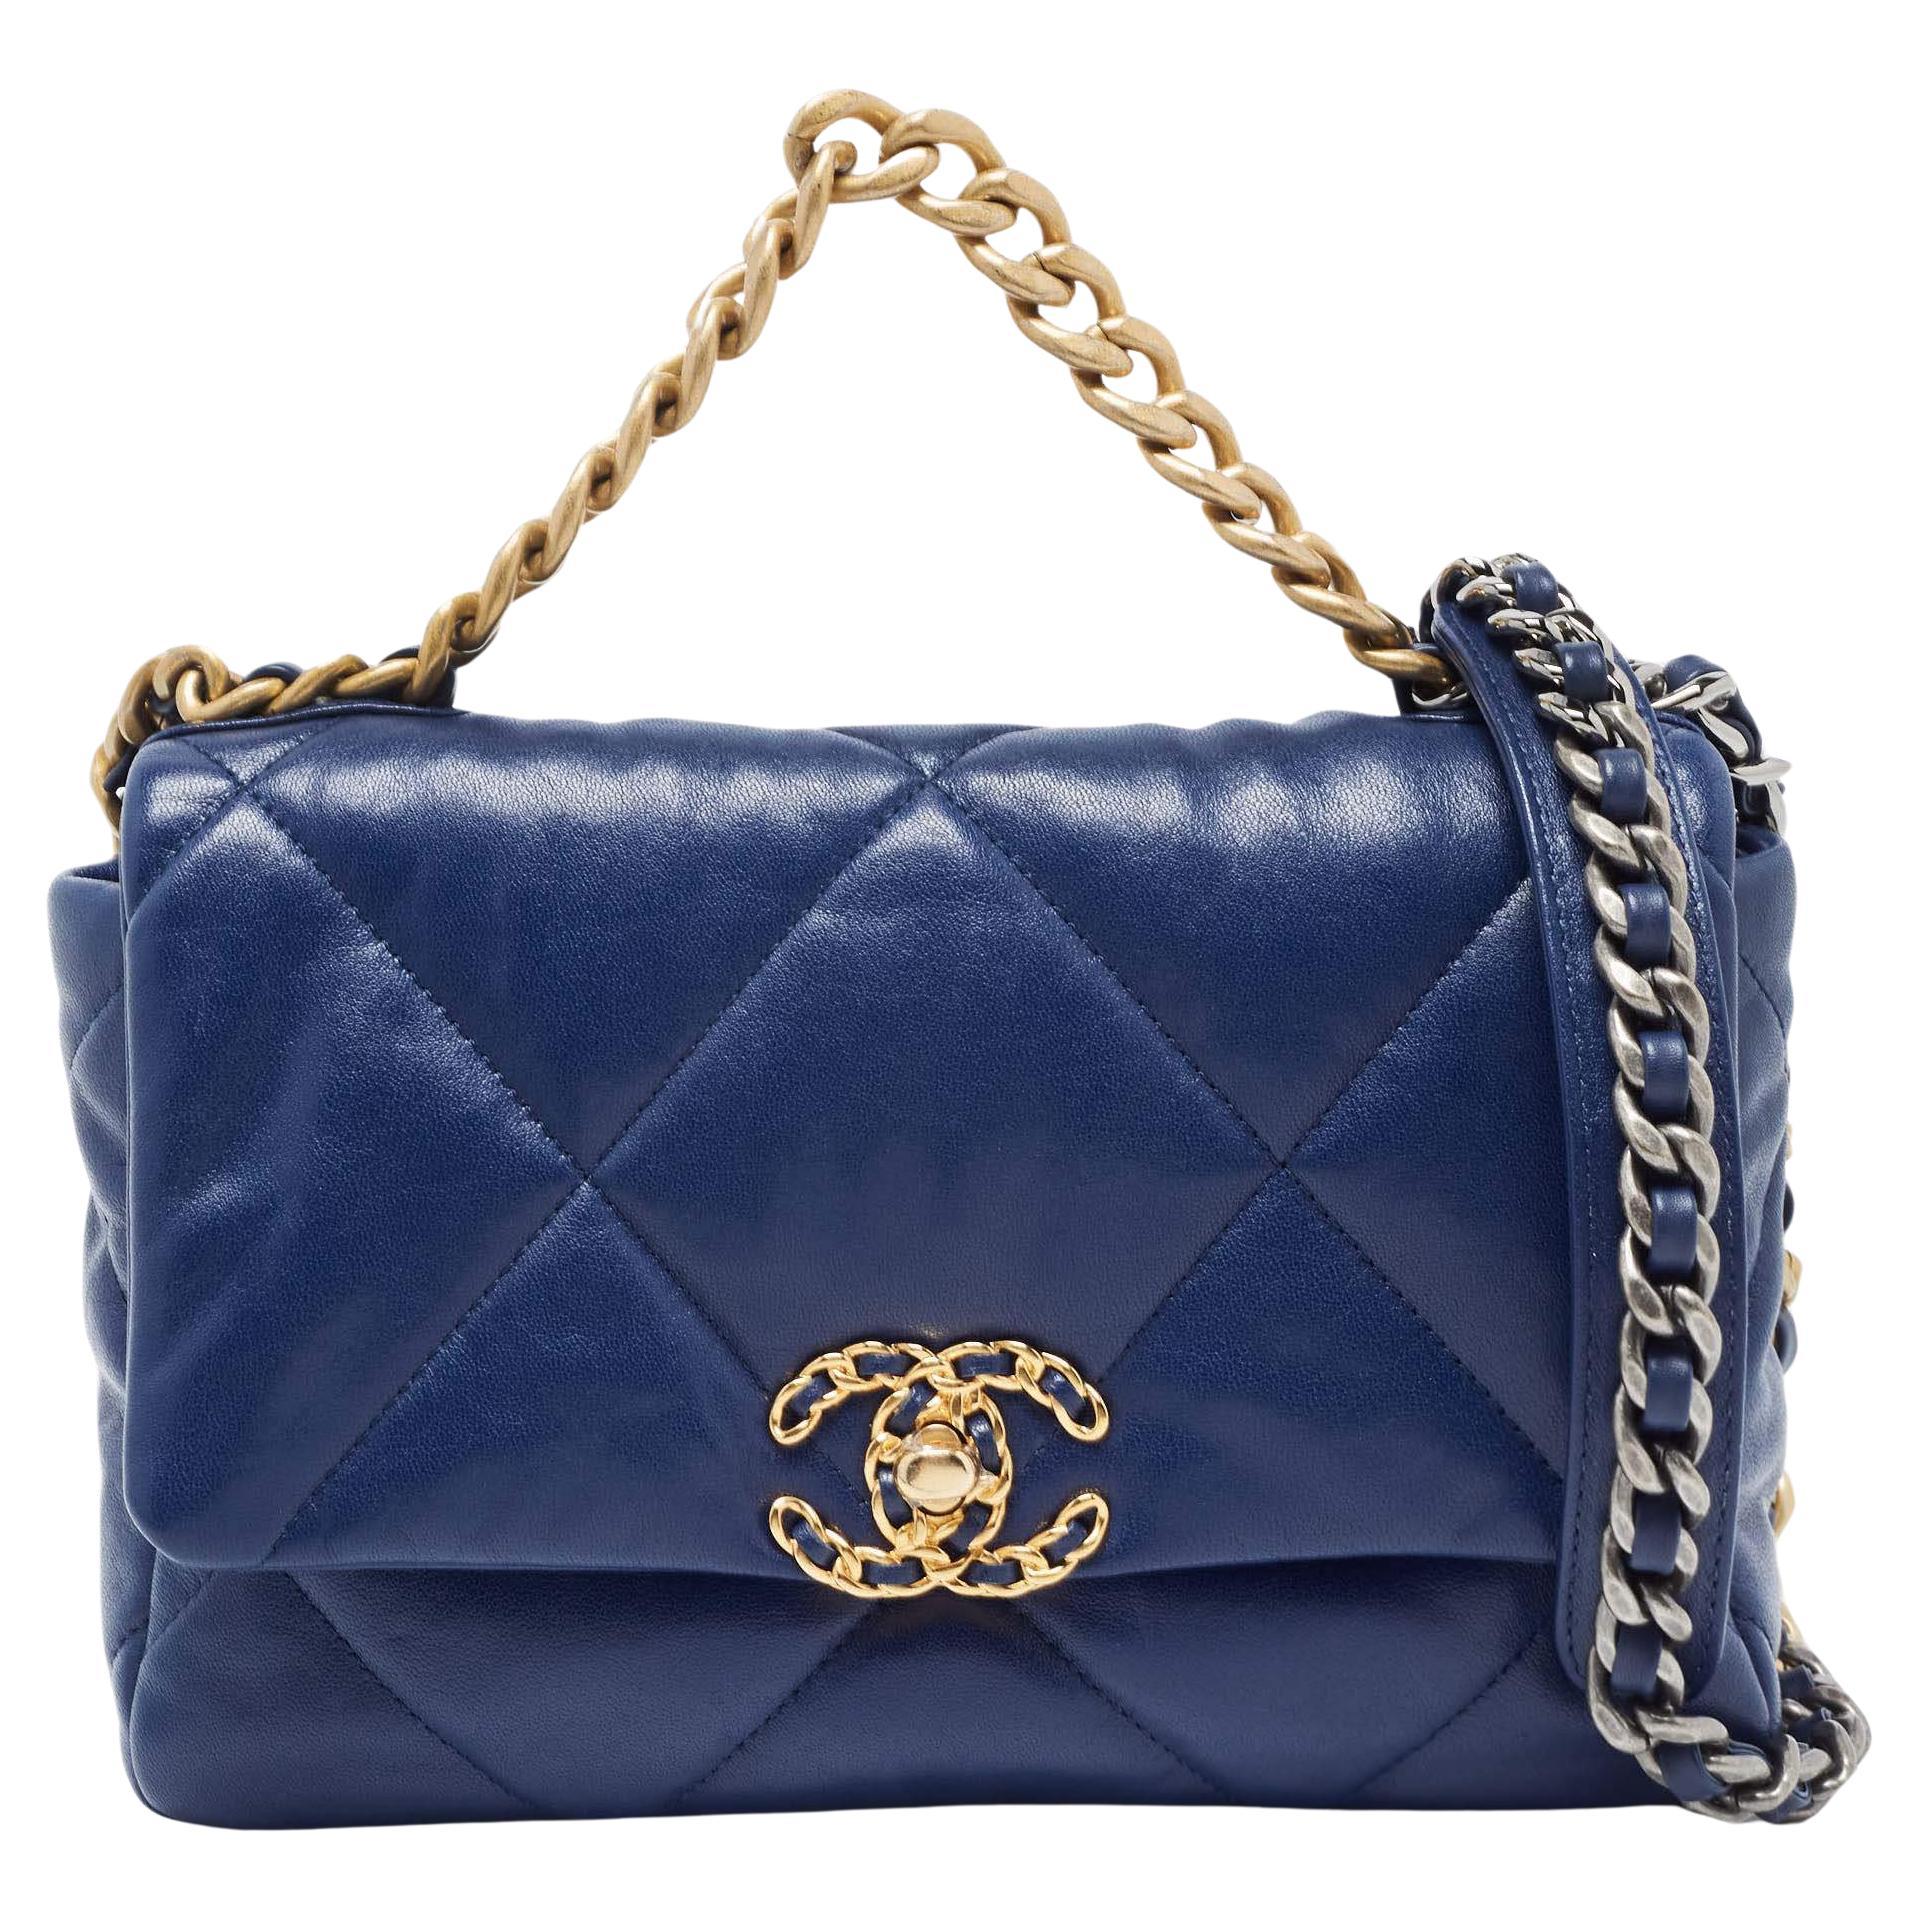 Chanel Blue Quilted Leather Medium 19 Flap Bag For Sale